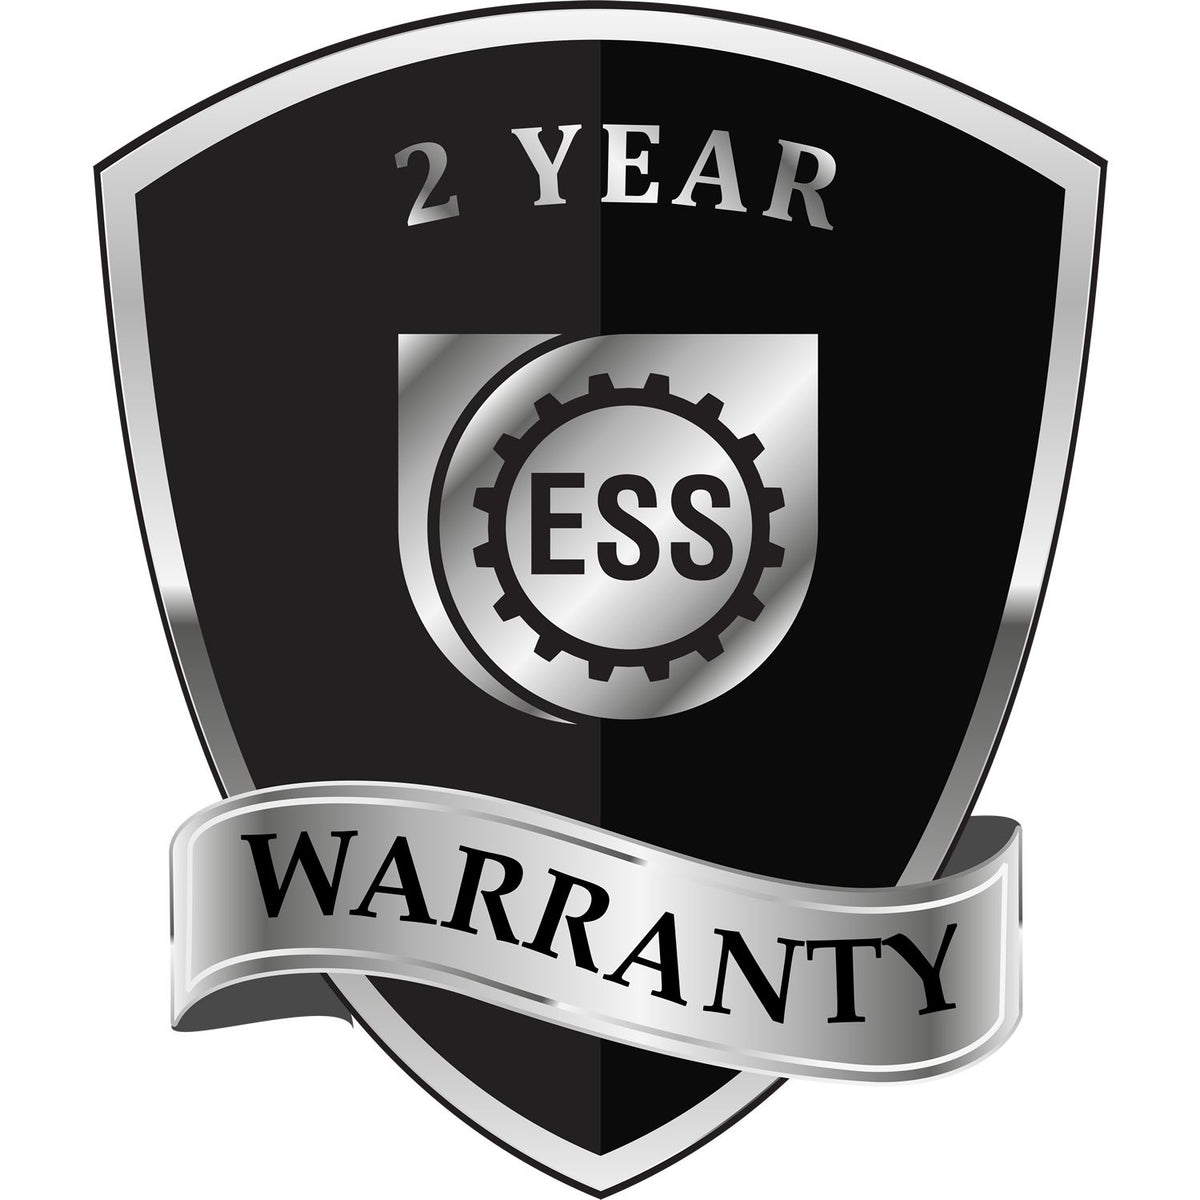 A badge or emblem showing a warranty icon for the Ohio Engineer Desk Seal